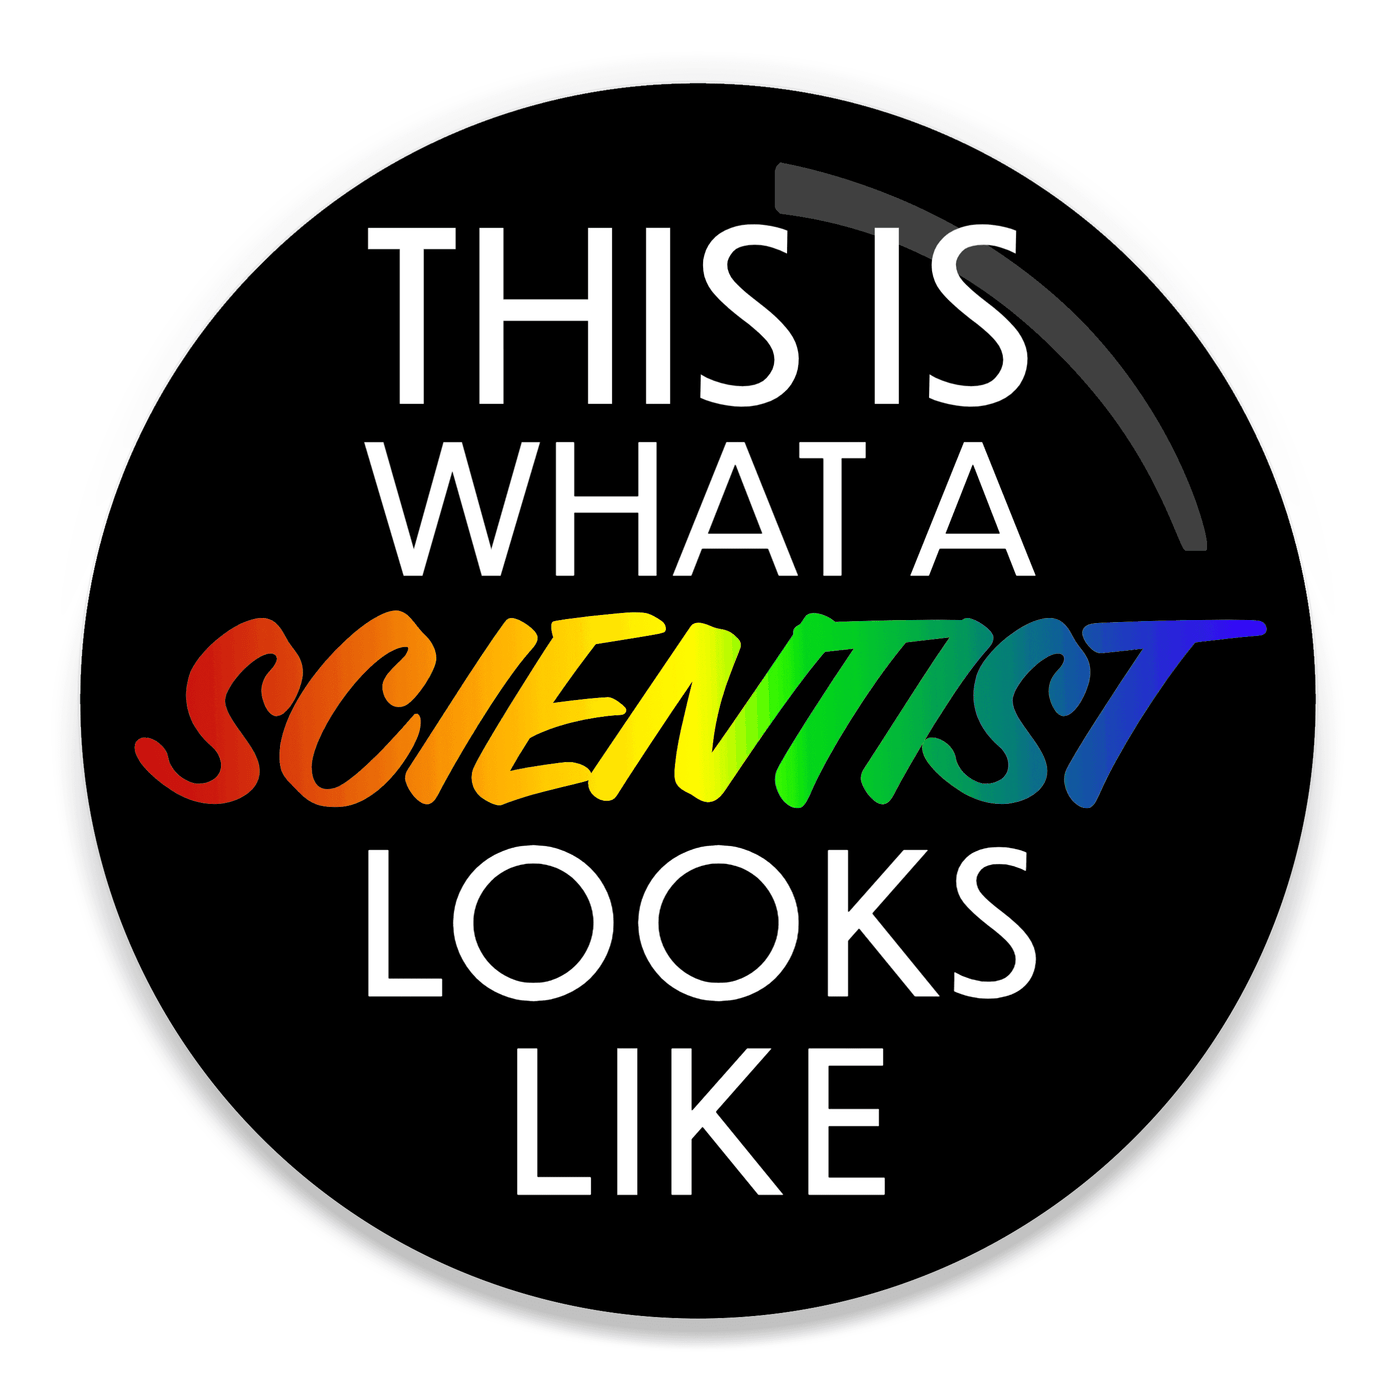 2.25 inch round colorful magnet with image of rainbow text that says this is what a scientist looks like